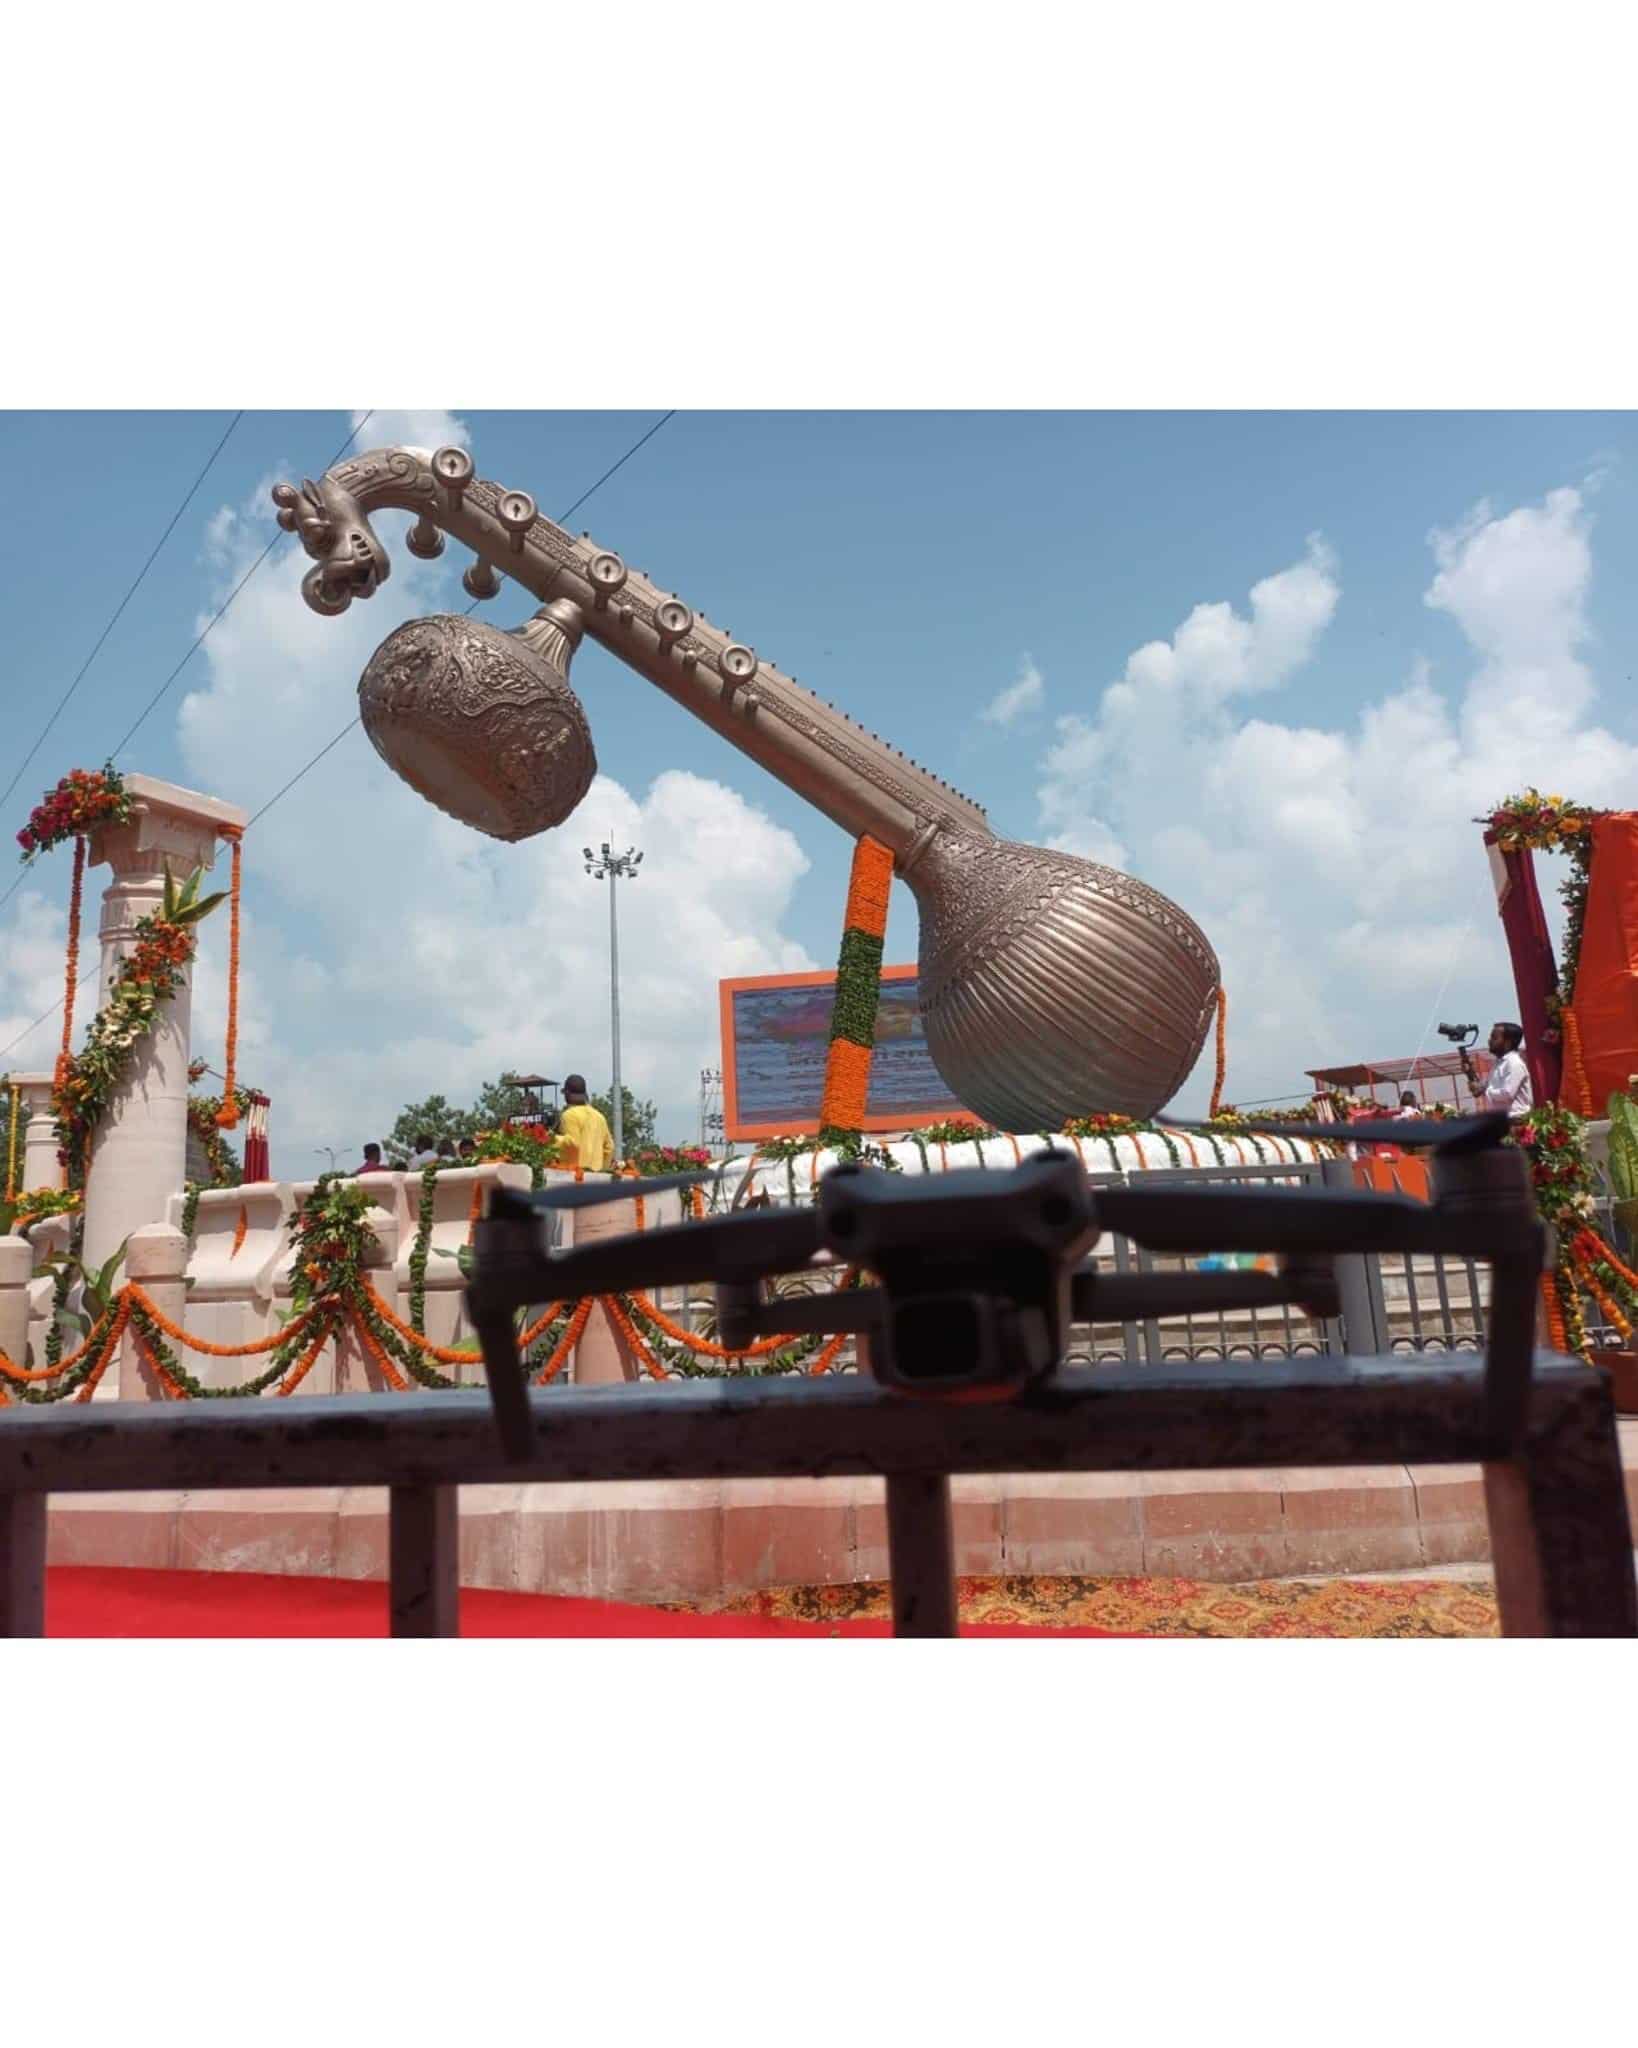 Giant veena has been installed at prominent intersection in Ayodhya